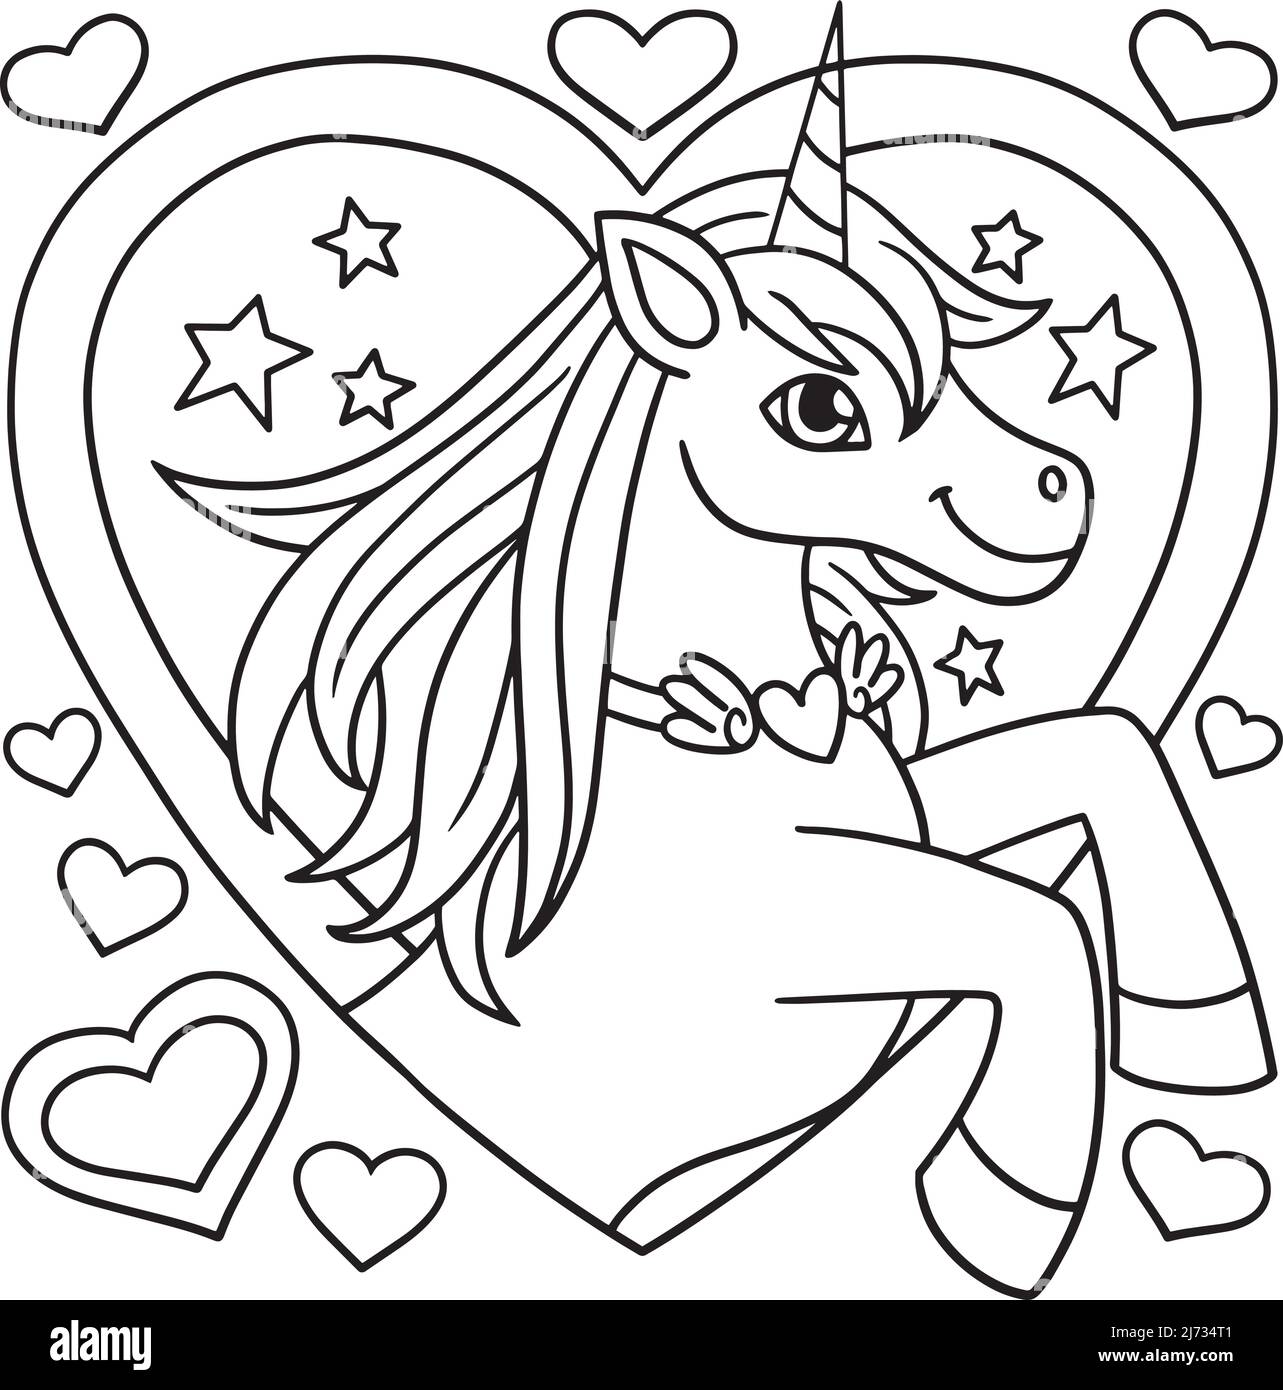 Unicorn With A Heart Coloring Page for Kids Stock Vector